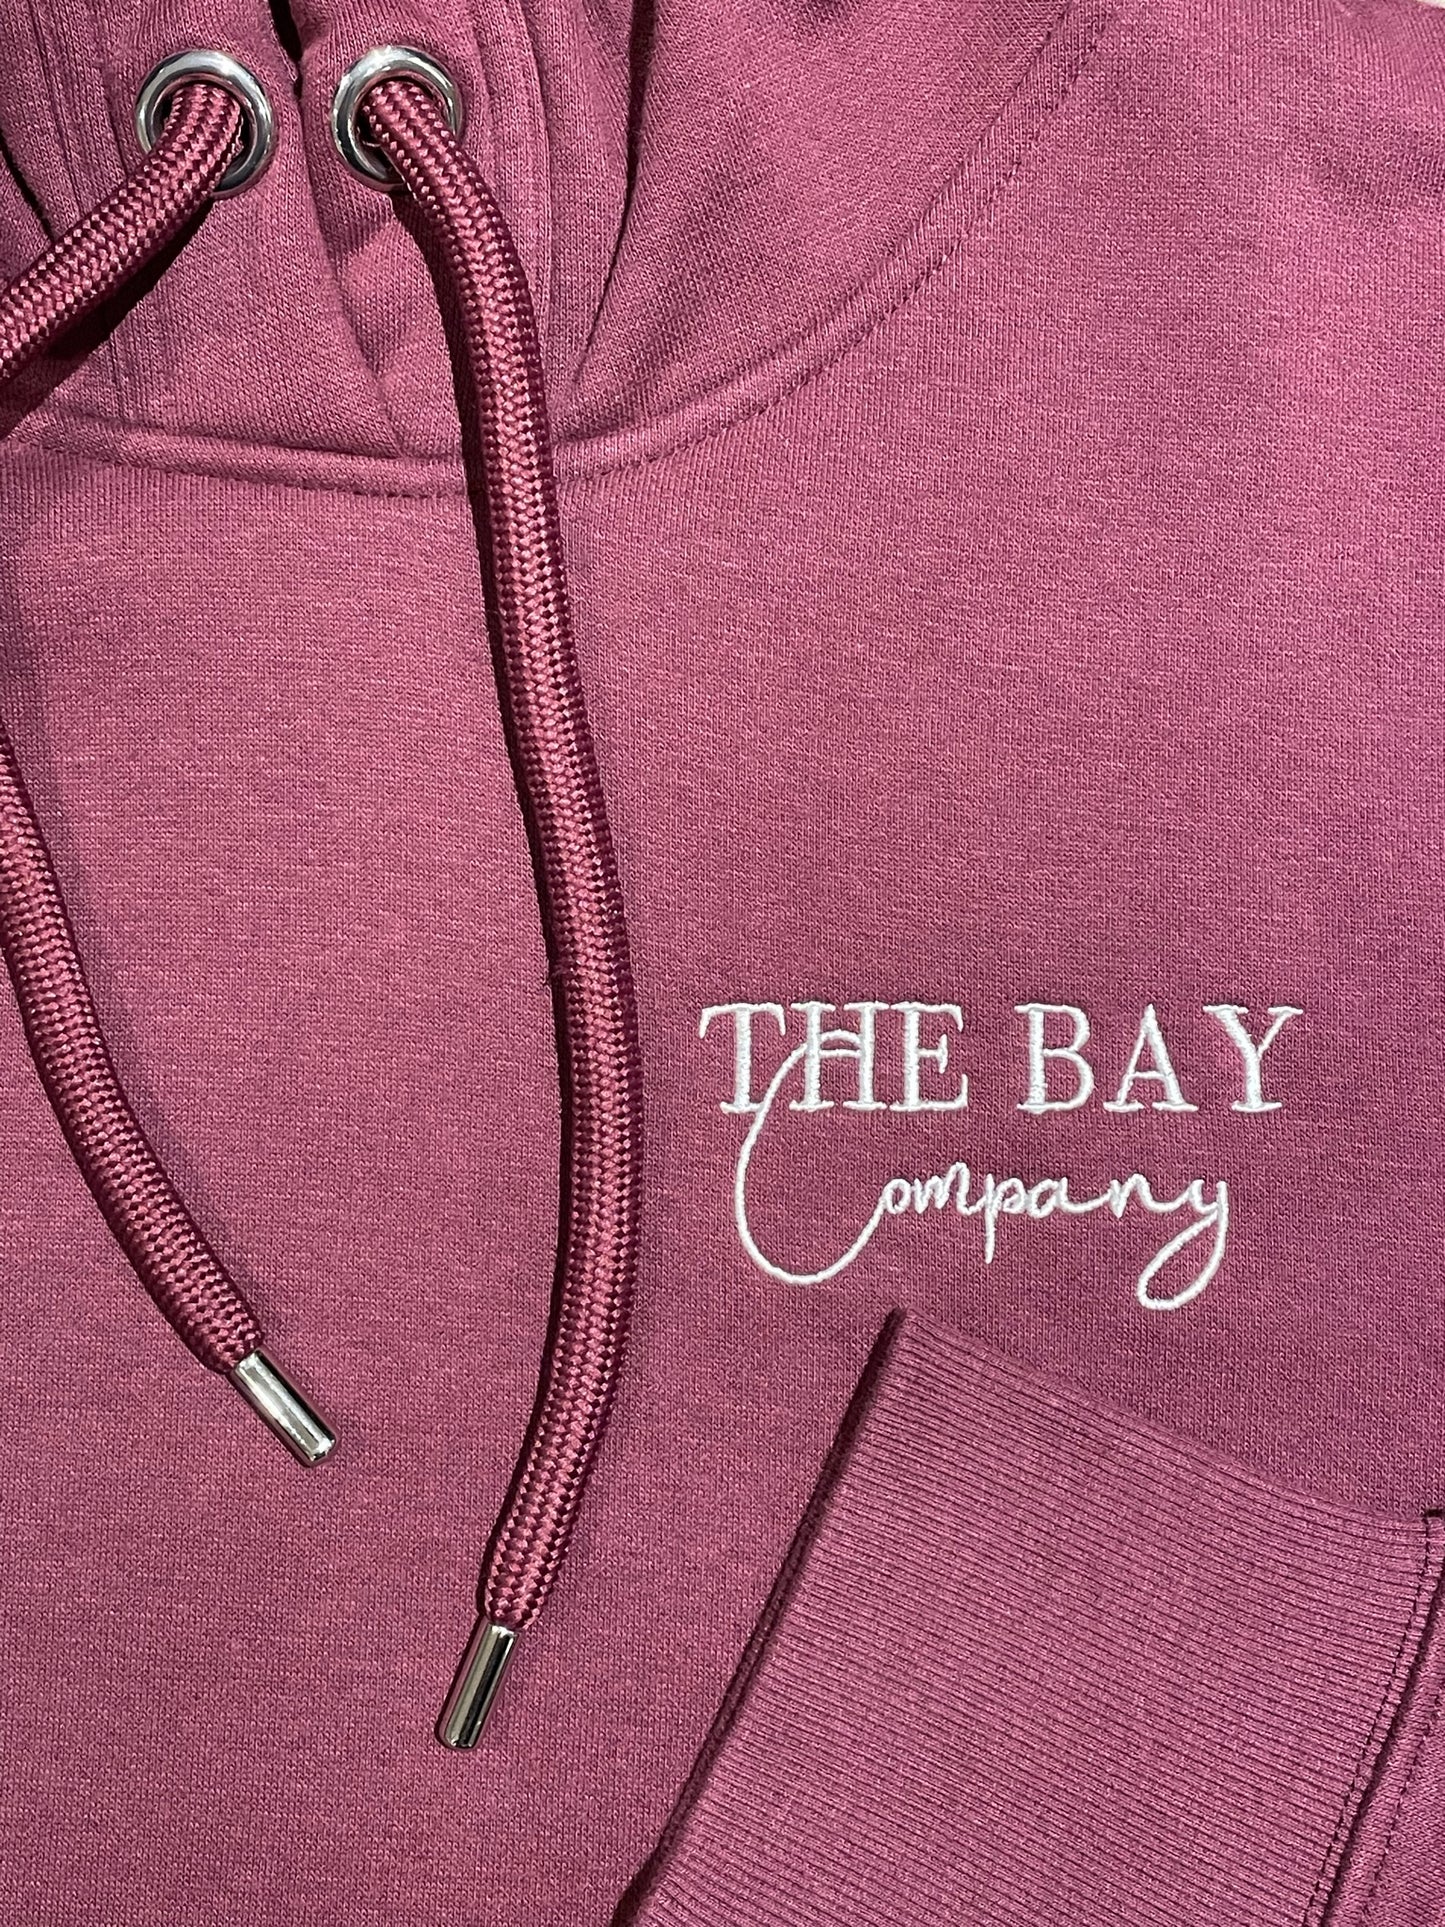 The women’s burgundy Robin Hood’s Bay hoodie from The Bay Company. Close up on detail